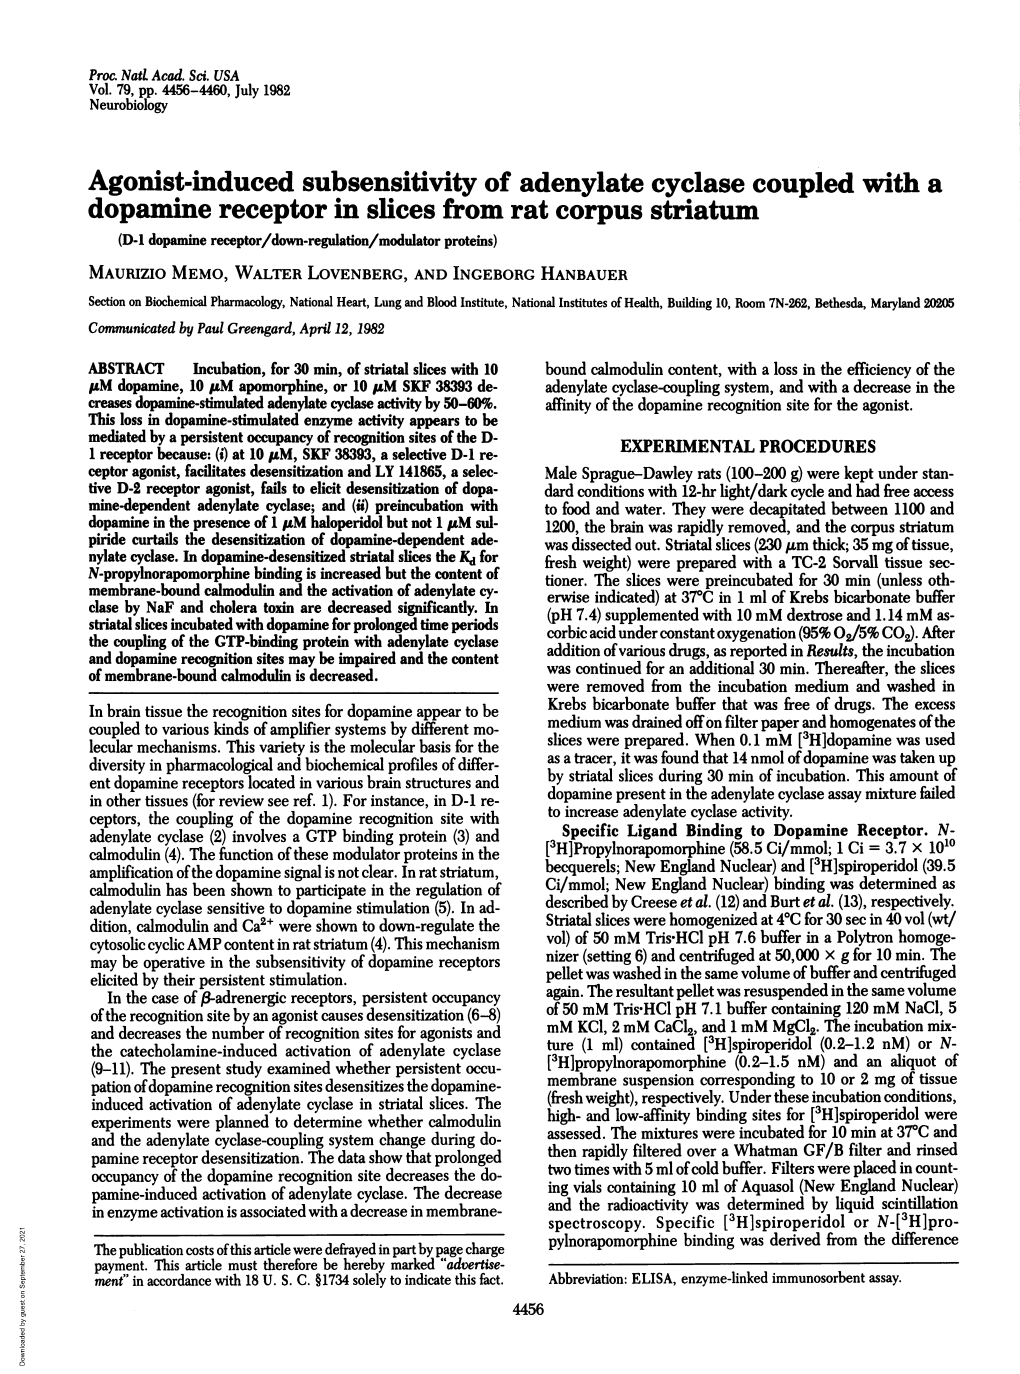 Agonist-Induced Subsensitivity of Adenylate Cyclase Coupled with A